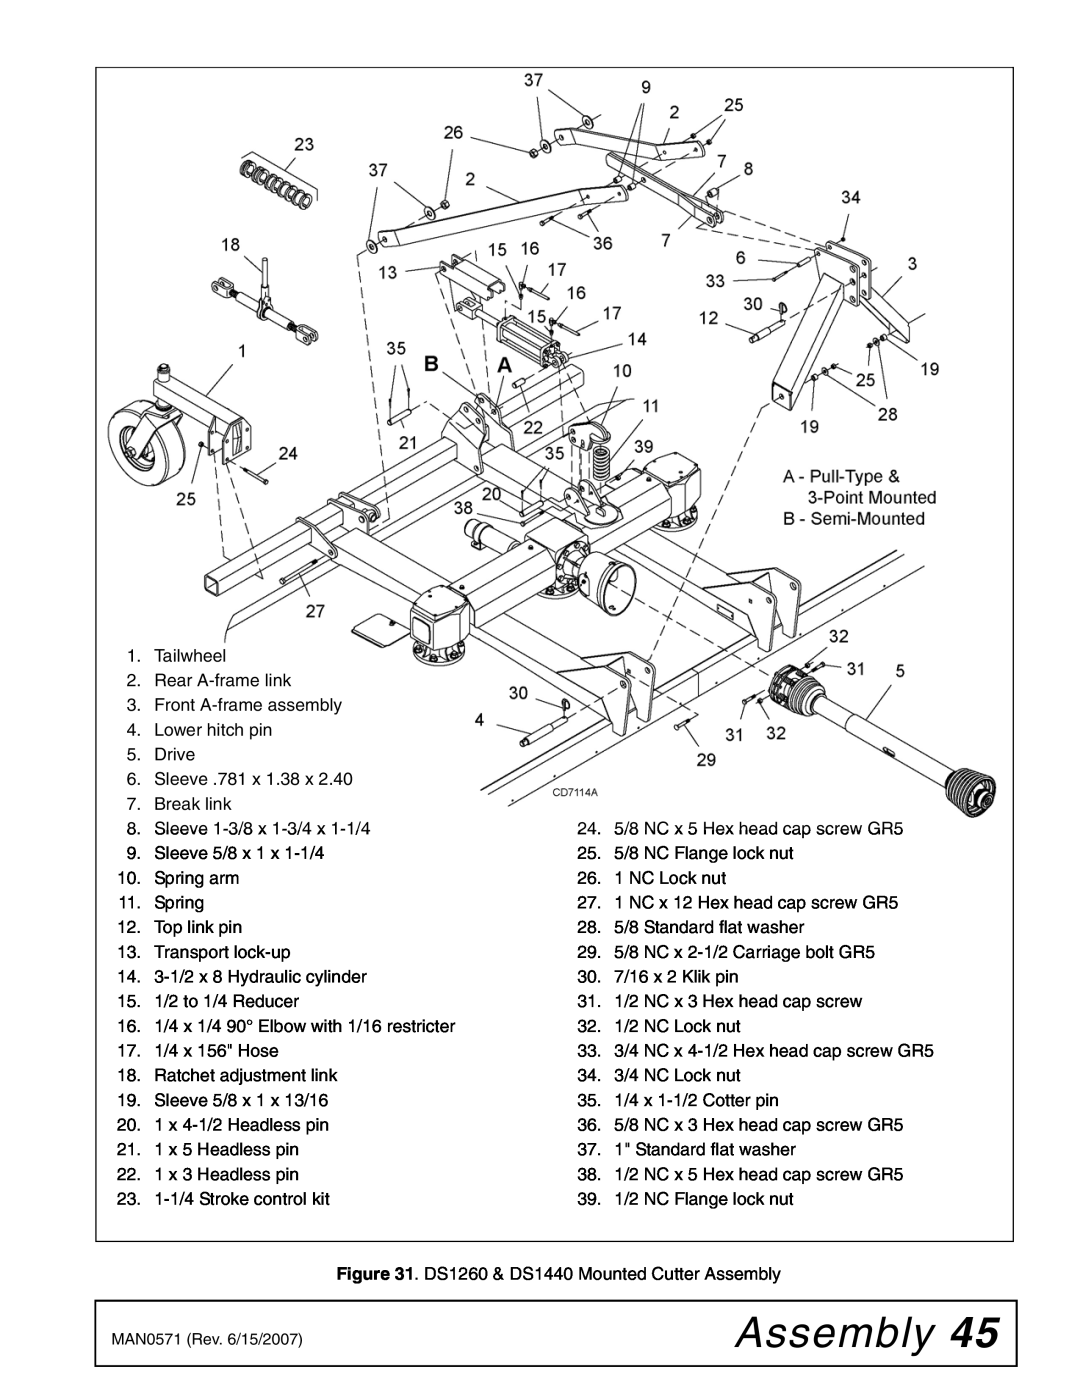 Woods Equipment DS1440Q, DSO1260Q, DS1260Q manual Assembly 